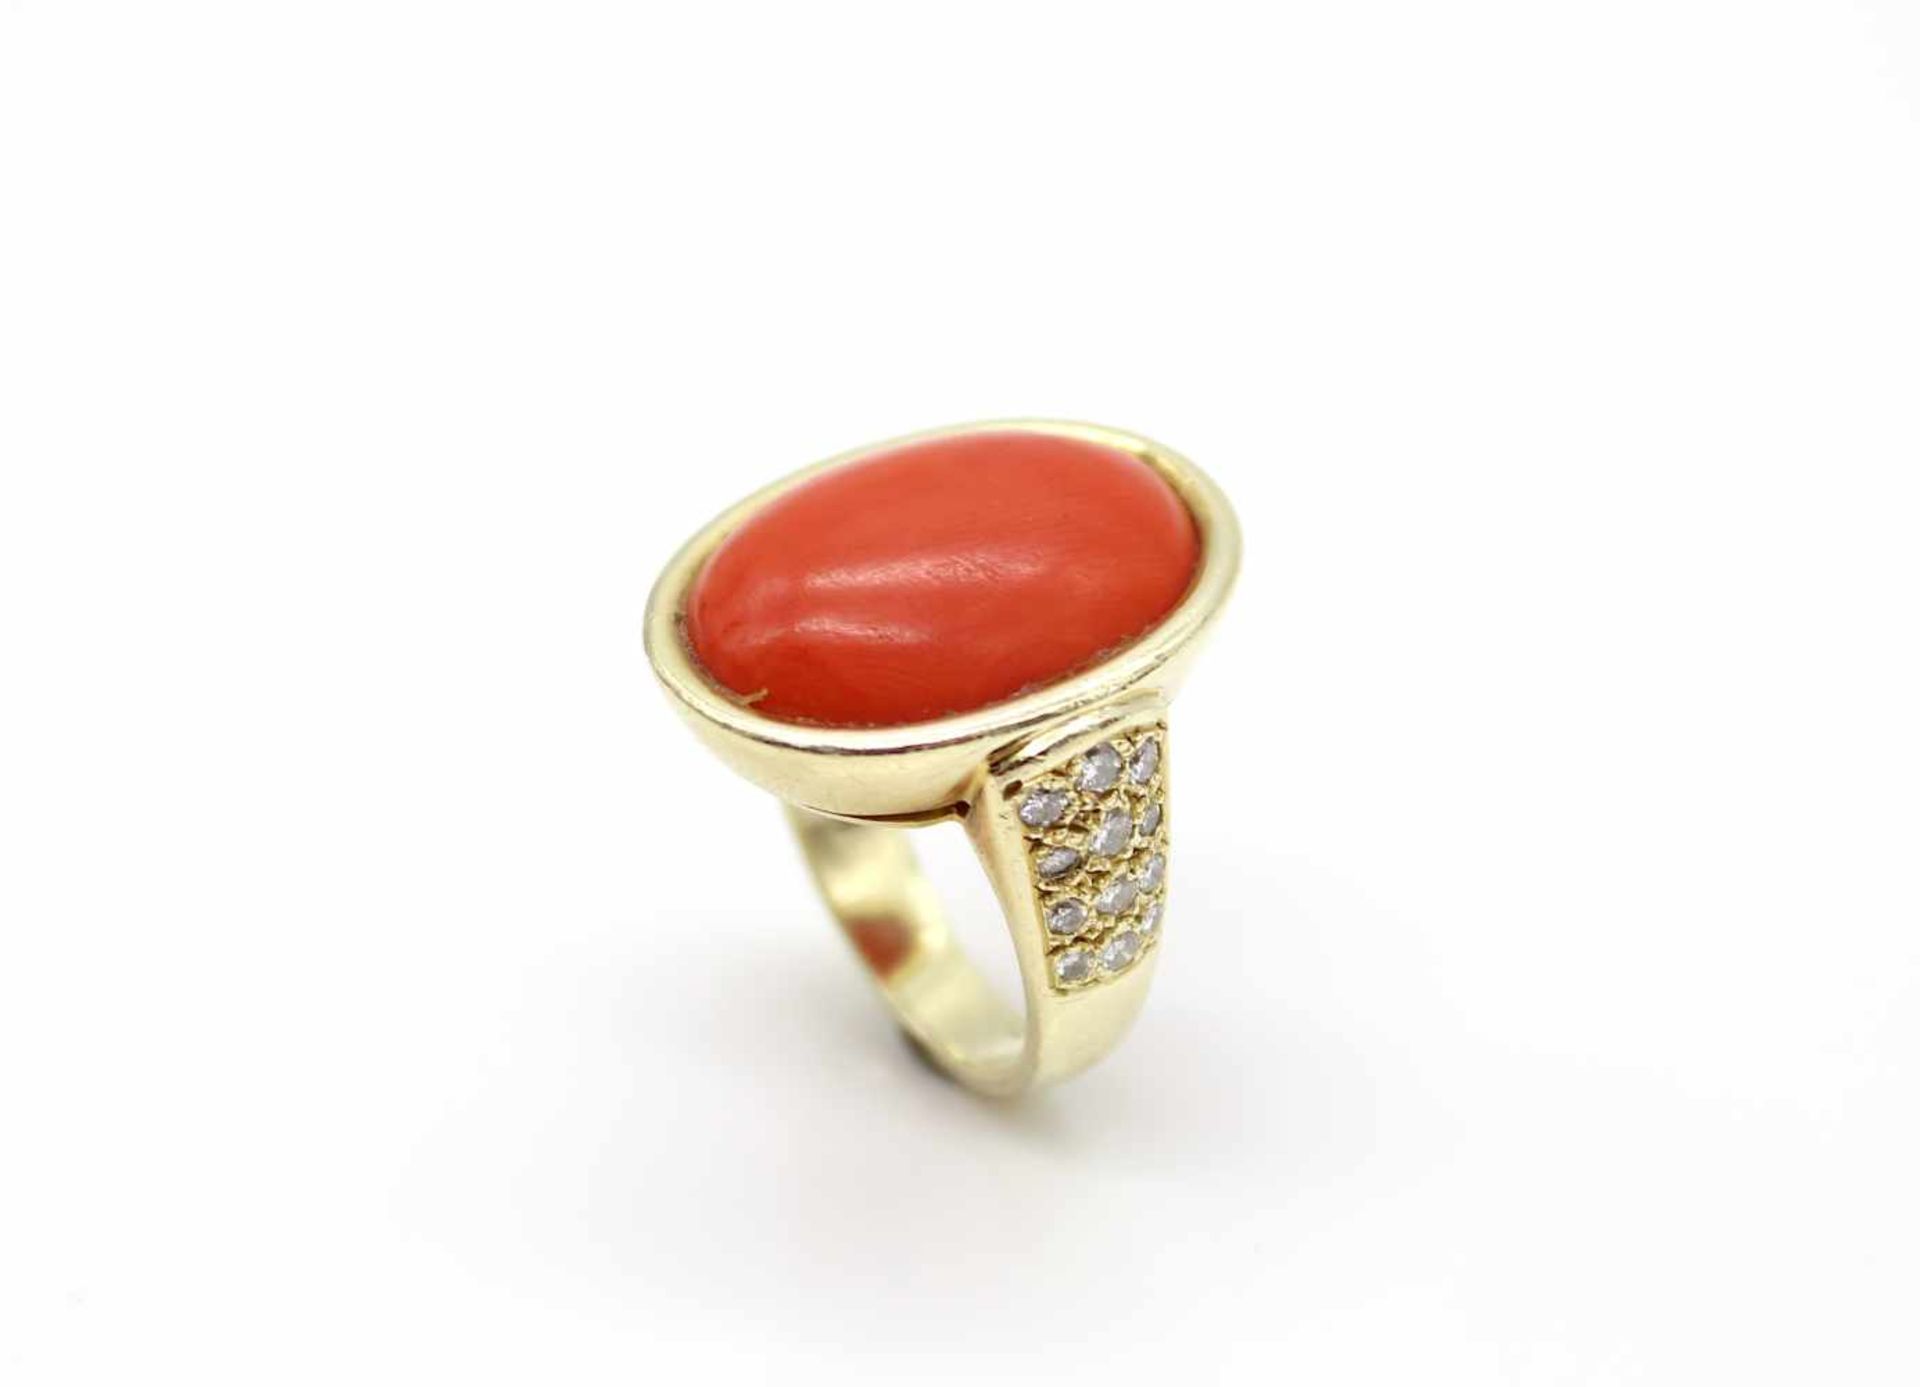 Ring made of 585 gold with an orange coral and 24 diamonds, total approx. 0.50 ct, high degree of